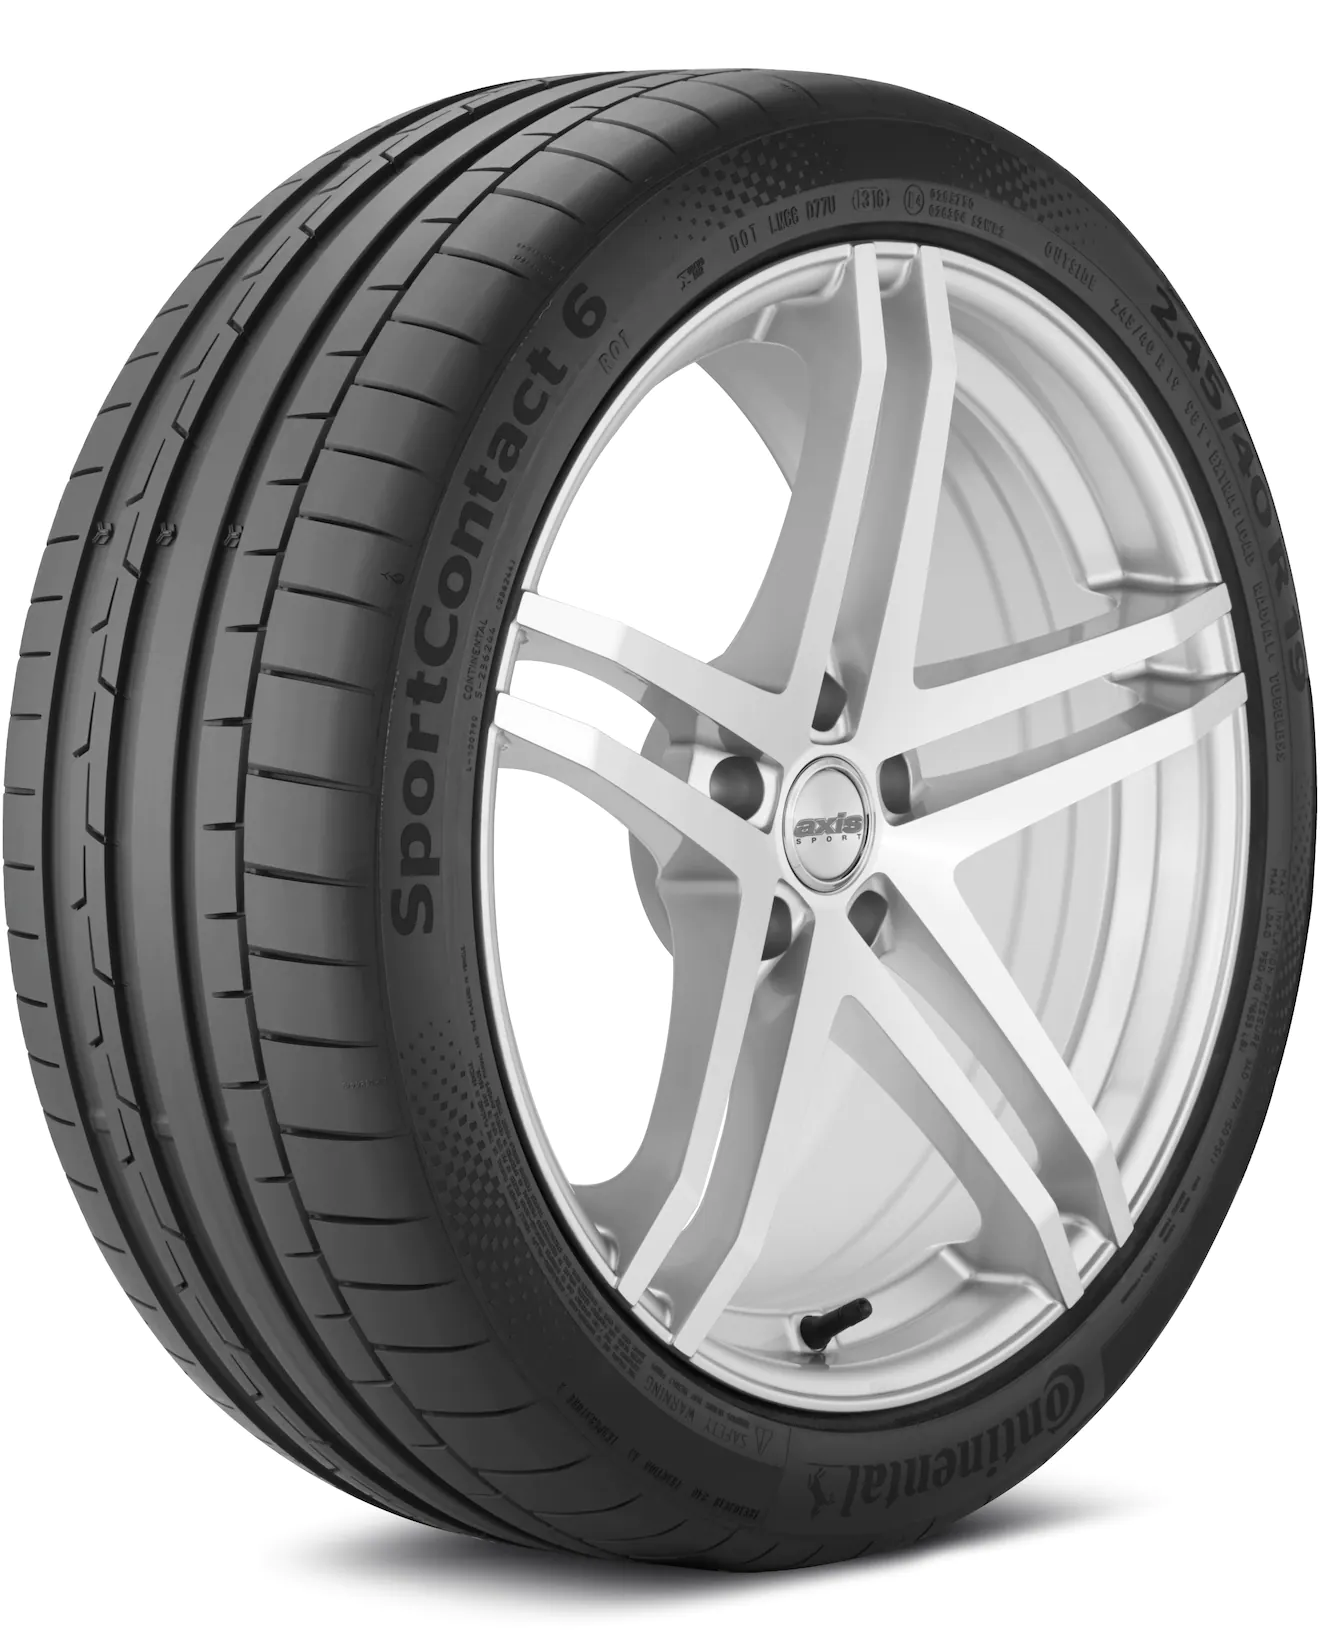 Continental SportContact 6 315/40 R21 115Y XL MO1 FP